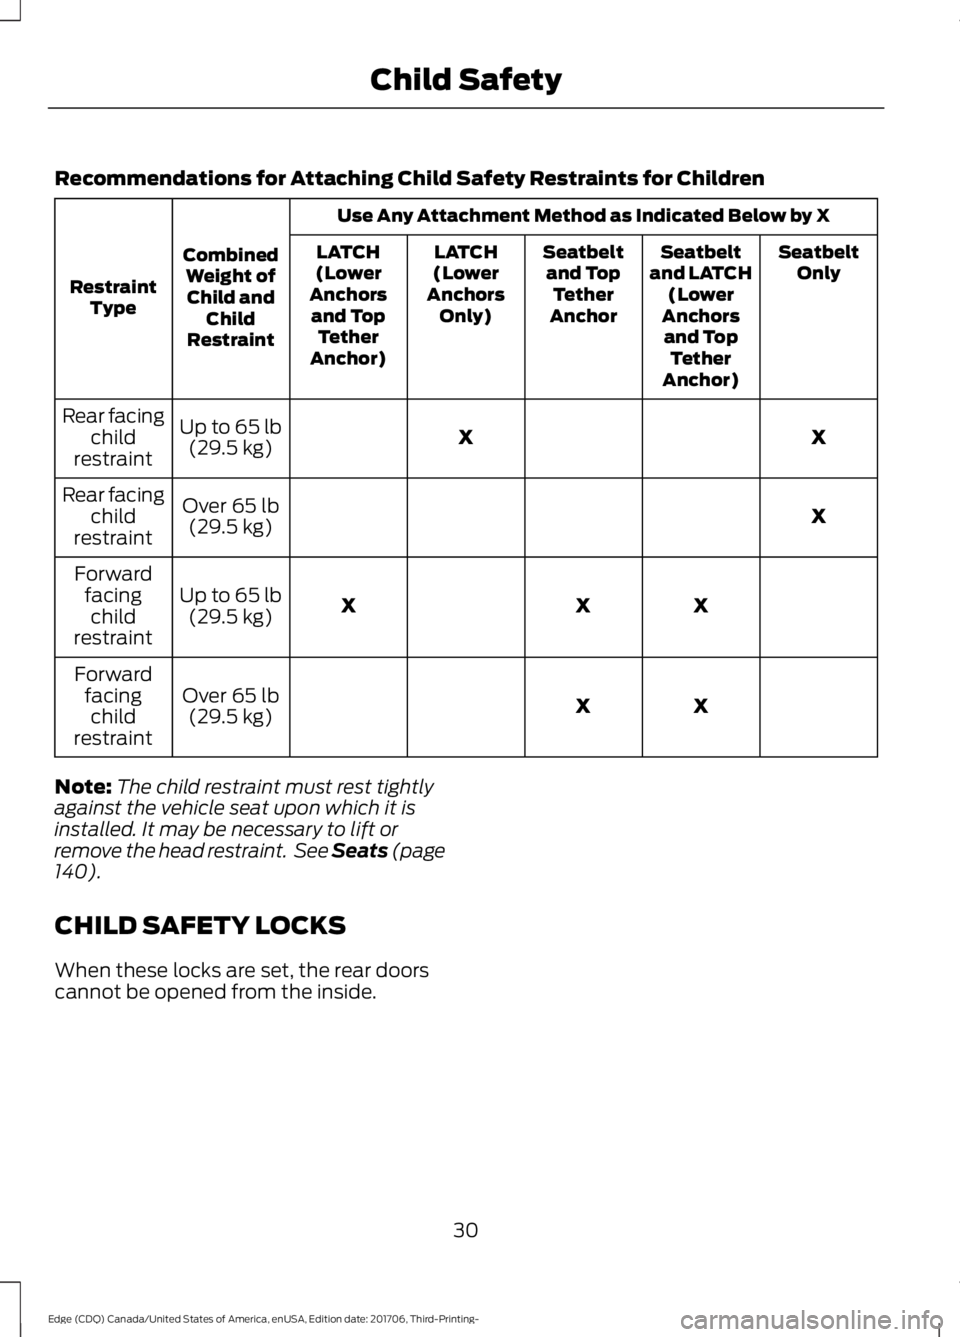 FORD EDGE 2018  Owners Manual Recommendations for Attaching Child Safety Restraints for Children
Use Any Attachment Method as Indicated Below by X
Combined Weight ofChild and Child
Restraint
Restraint
Type Seatbelt
Only
Seatbelt
a